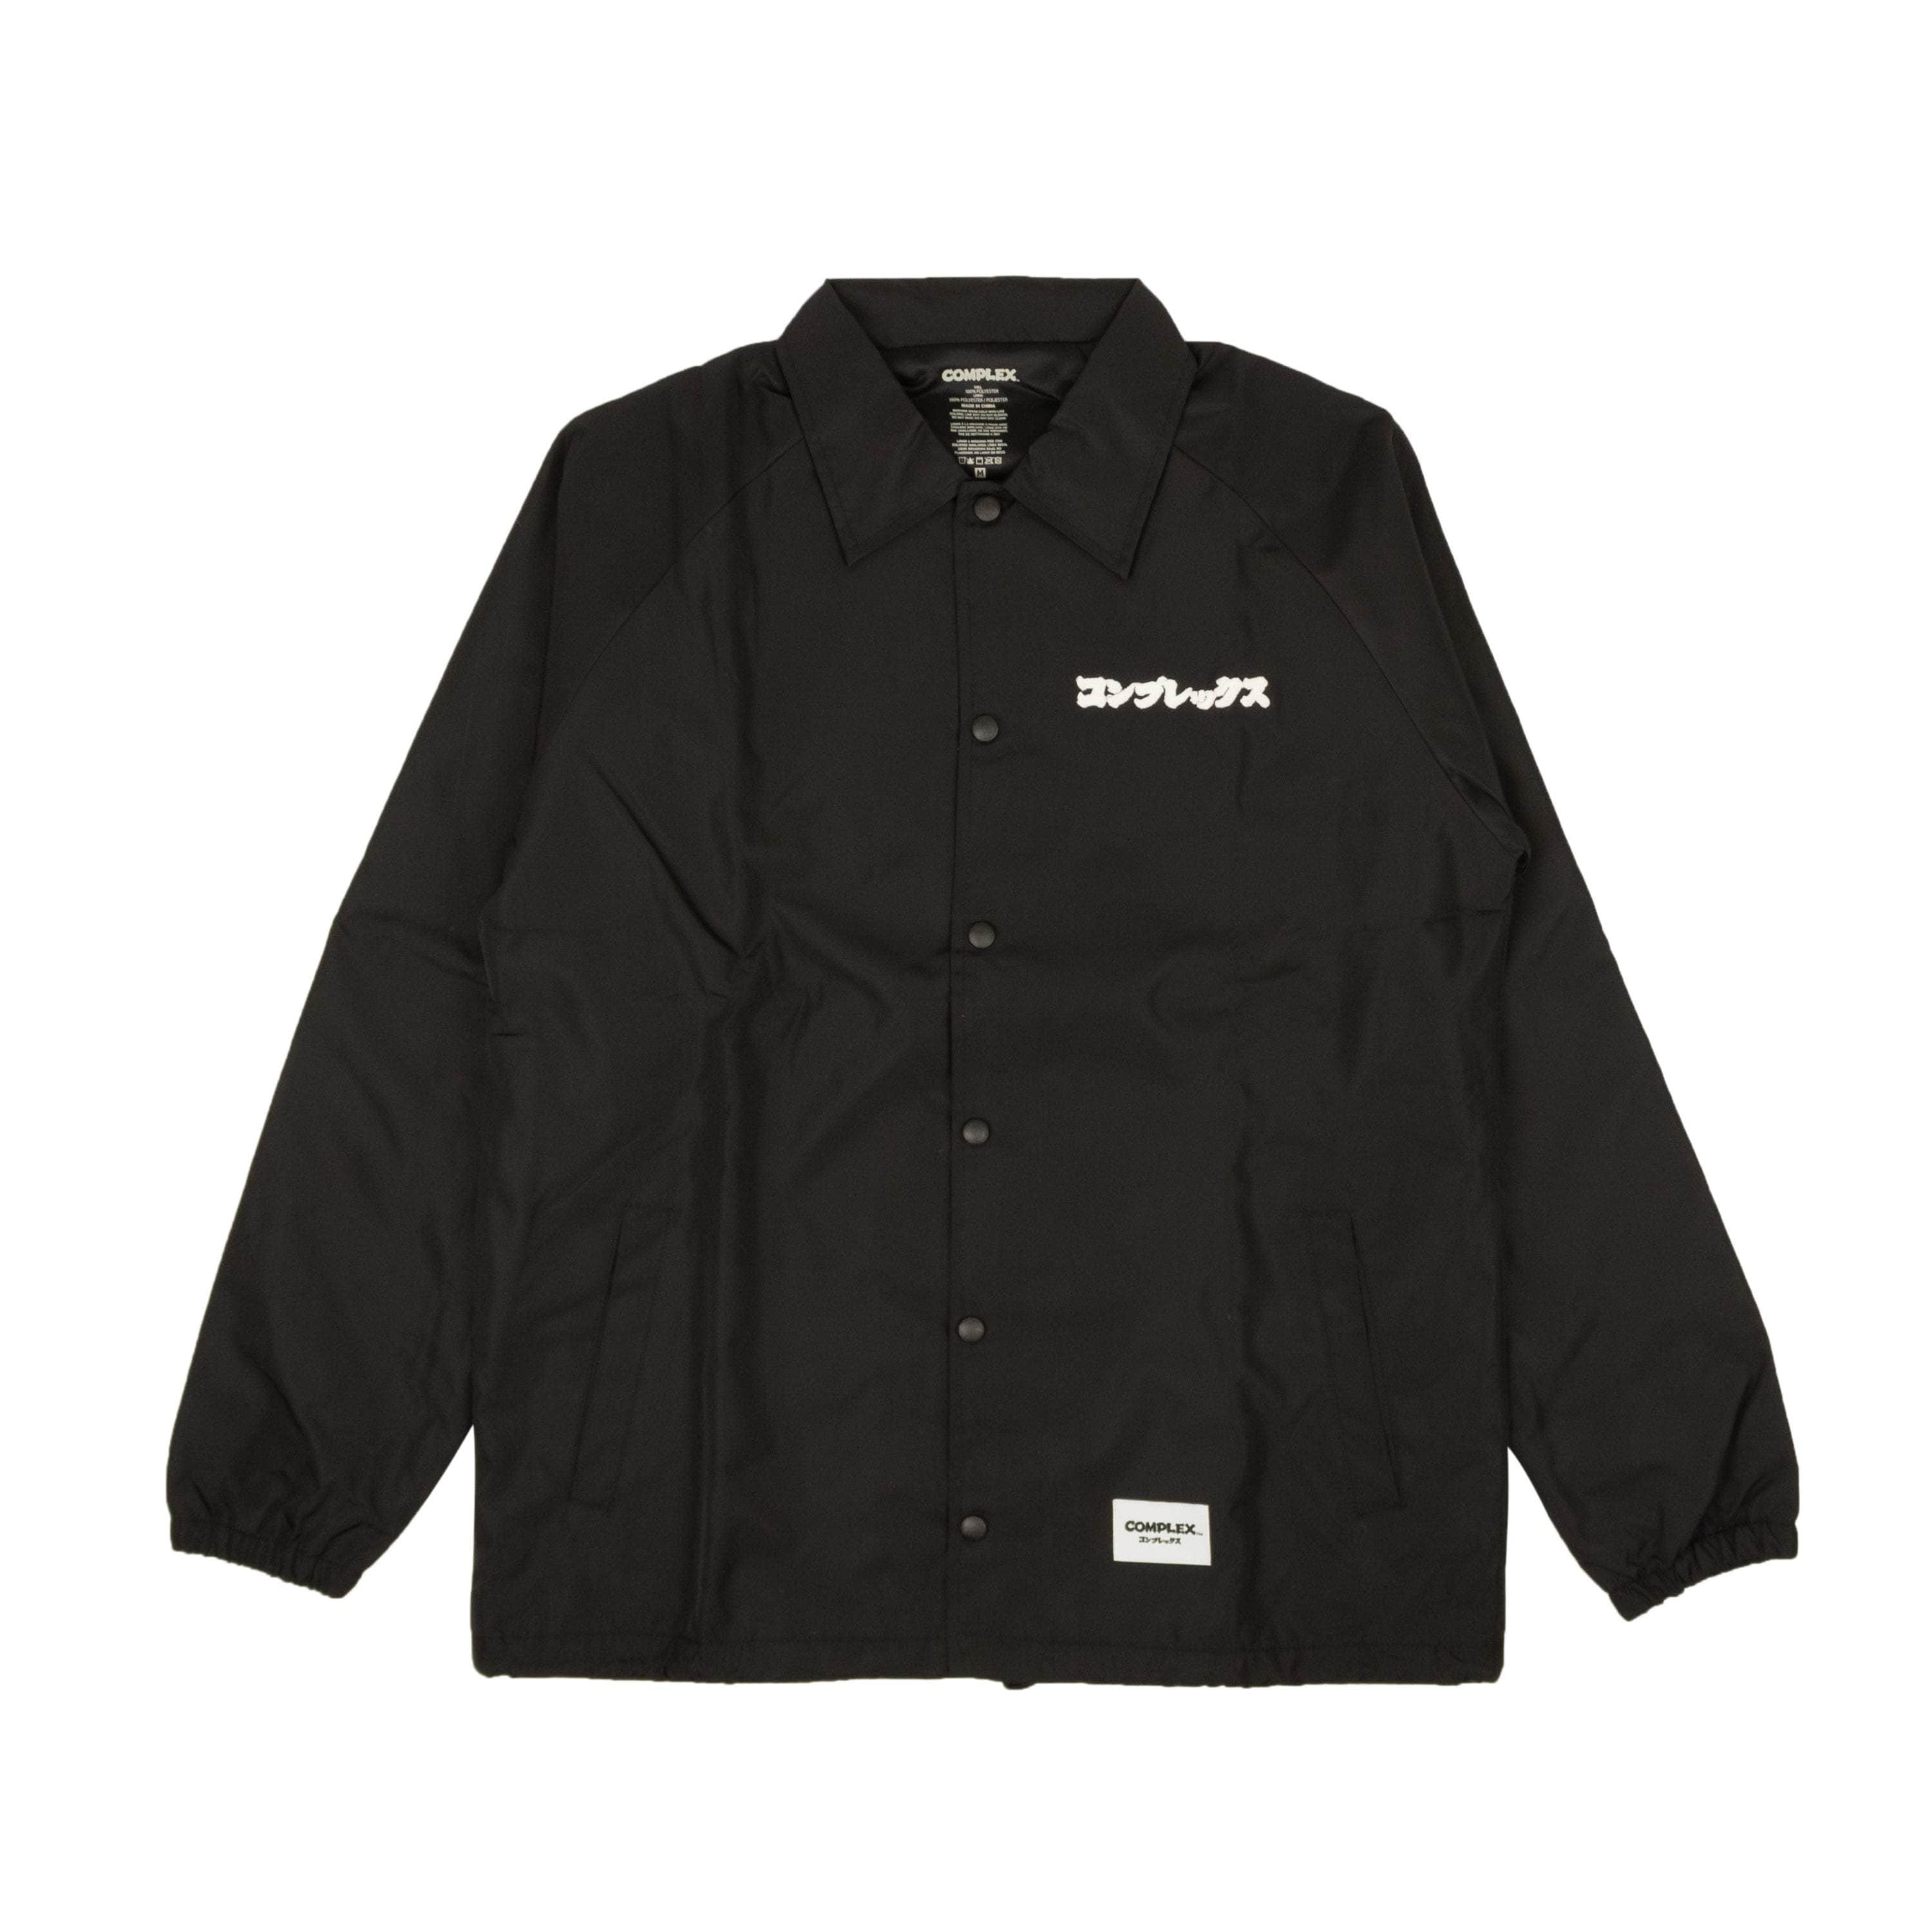 Complexcon x Nigo channelenable-all, chicmi, complexcon-x-nigo, couponcollection, gender-mens, main-clothing, mens-field-jackets, mens-shoes, size-m, size-s, size-xl, size-xs, size-xxl, under-250 20YR Overshirt Jacket